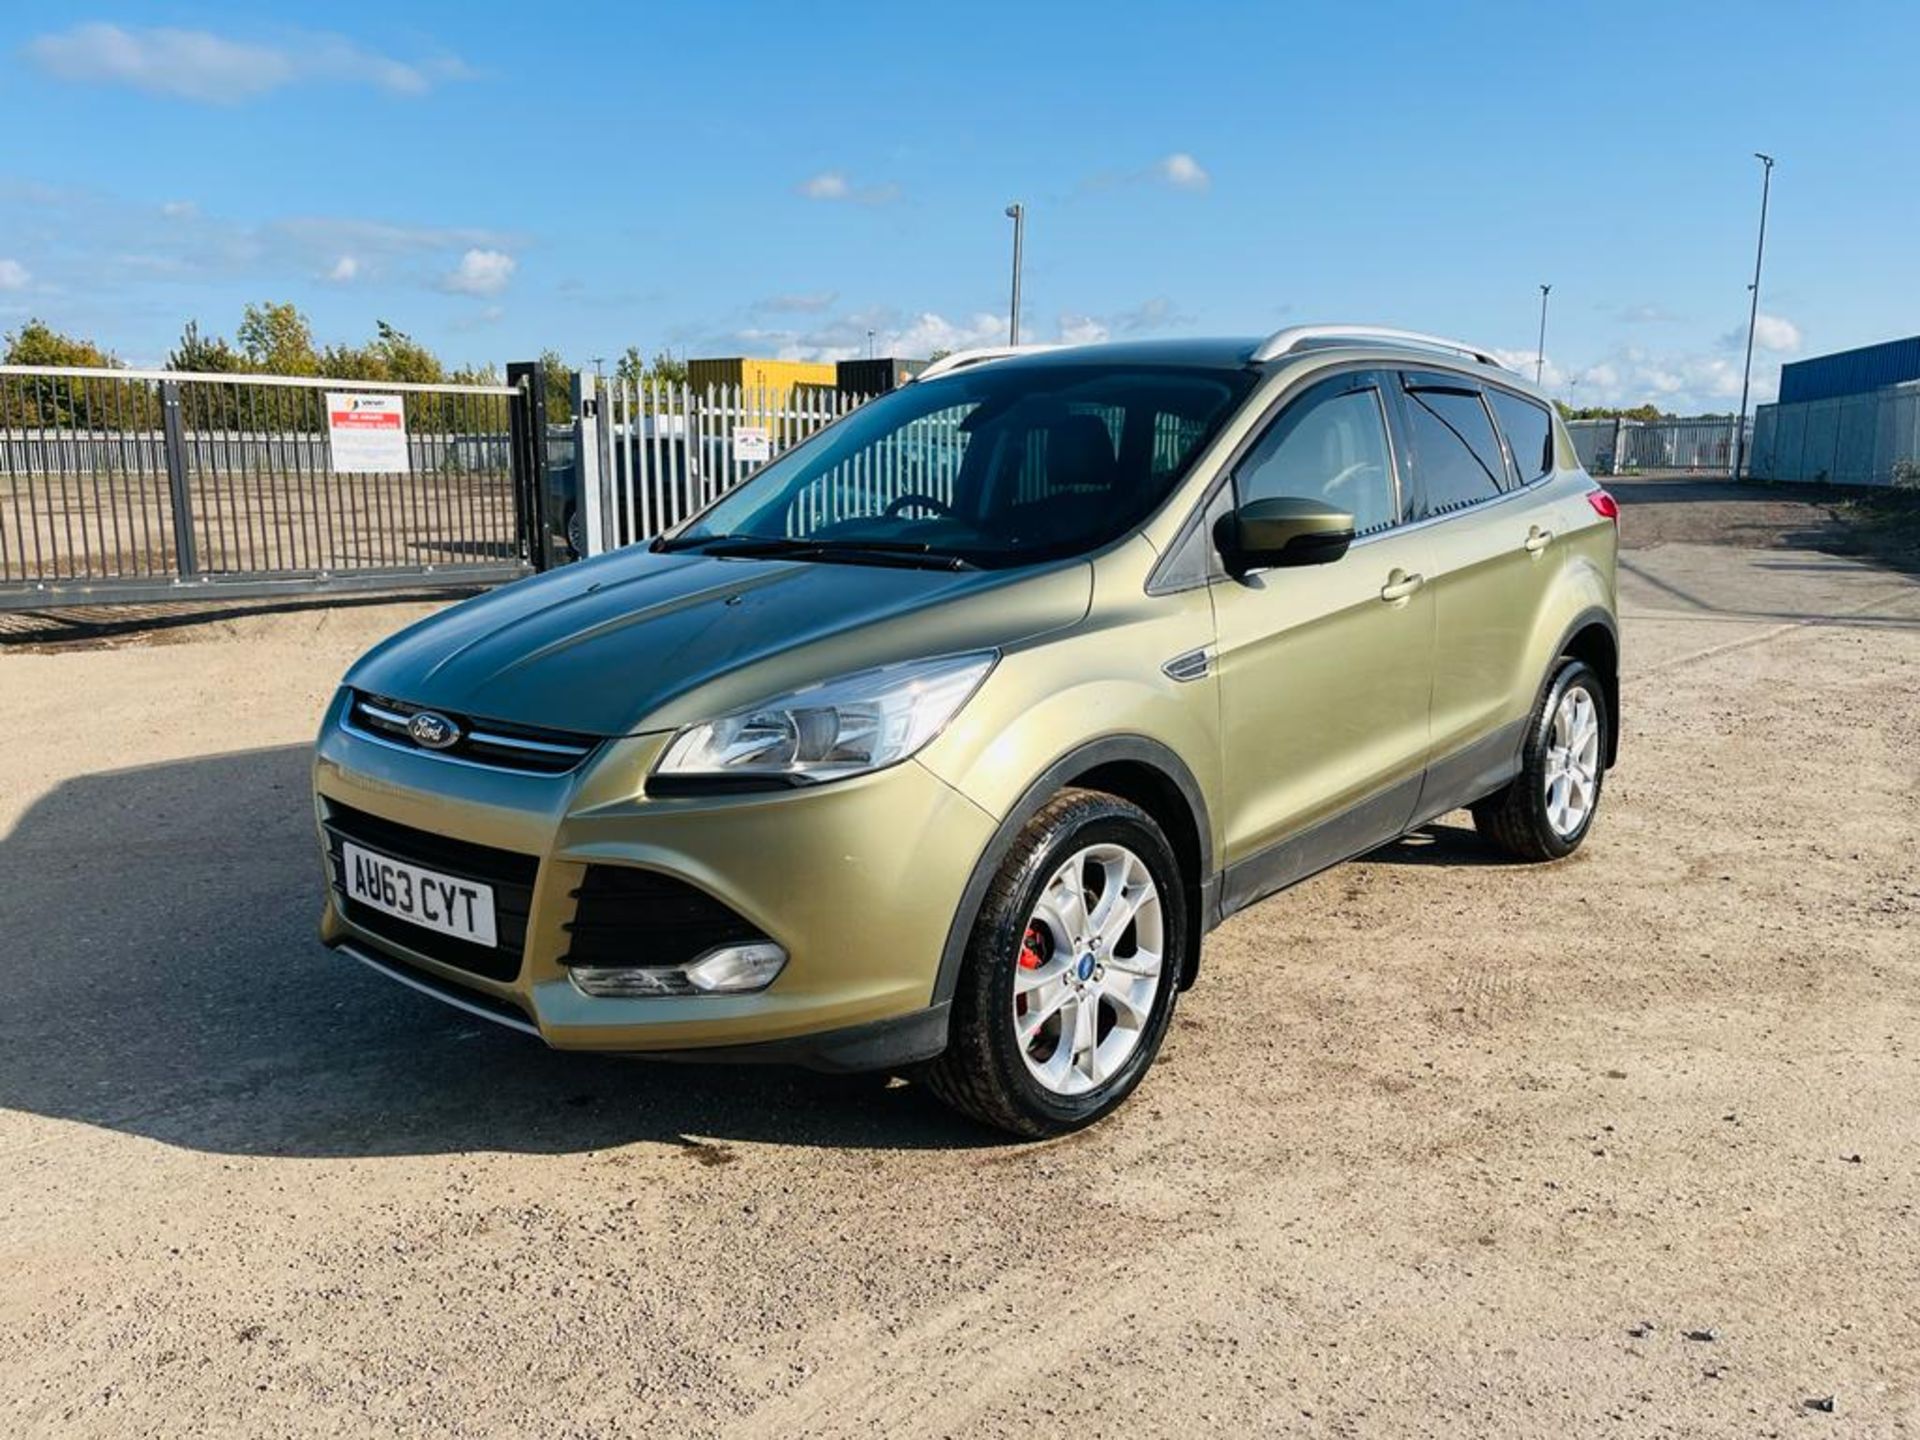 ** ON SALE ** Ford Kuga 2.0 TDCI 163 4WD Titanium 2013 (63 Reg) - No Vat - Air Conditioning - Image 14 of 32